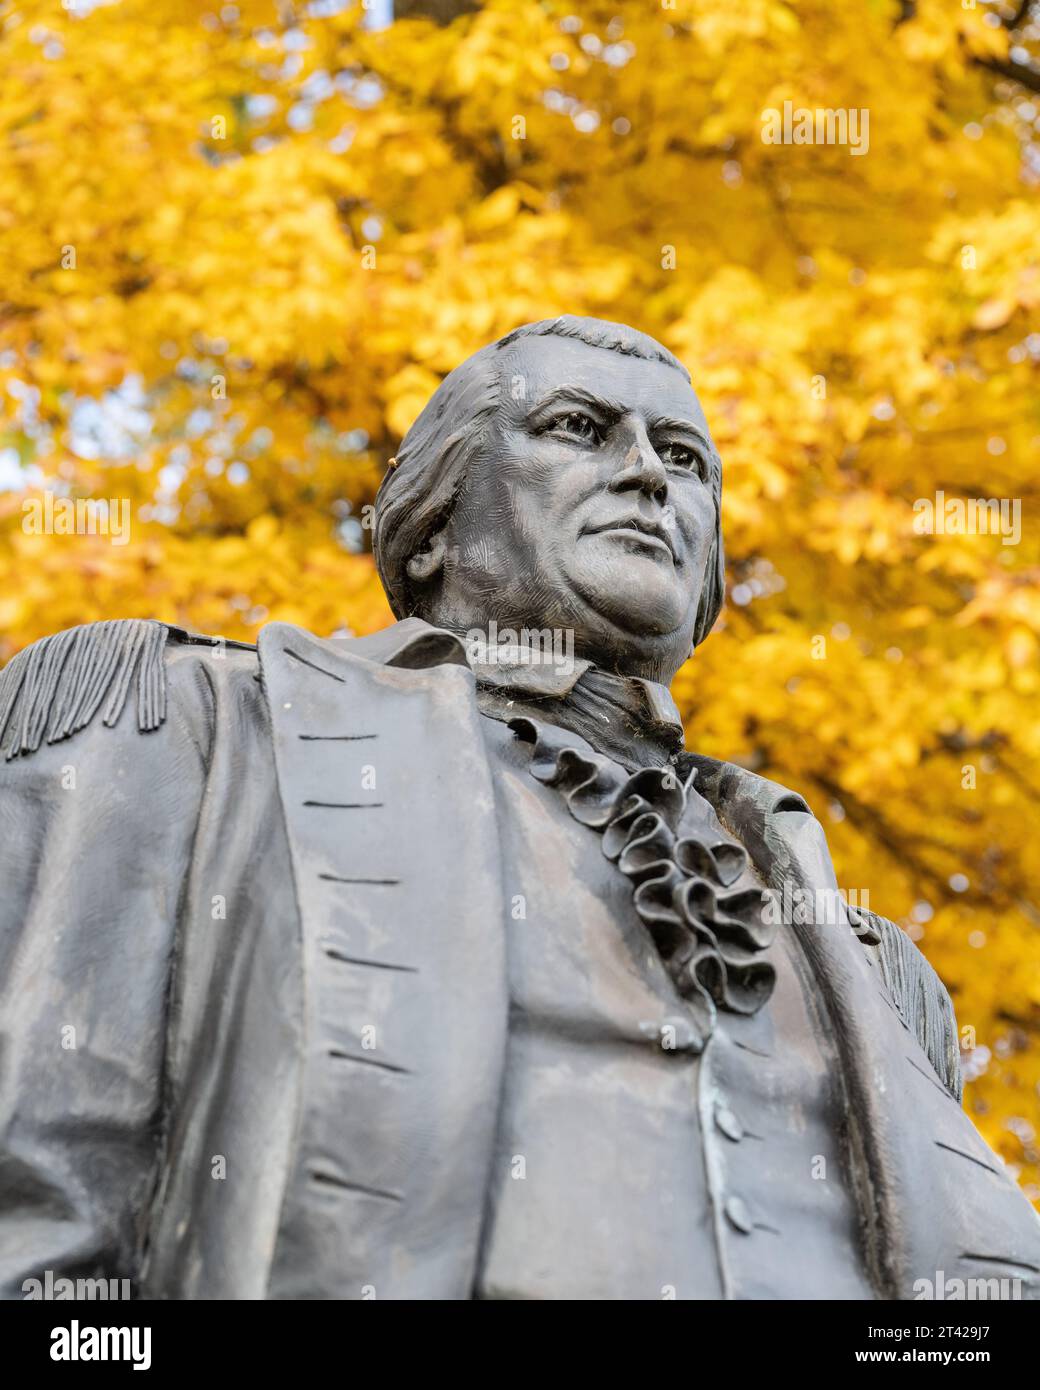 Valley Forge, PA USA 27th, Oct. 2023 - Statue of Revolutionary War Maj. General Nathaniel Greene. Beautiful fall weather in Valley Forge National Park in the mid-Atlantic region of the United States with fall colors peaking. Credit: Don Mennig / Alamy News Stock Photo